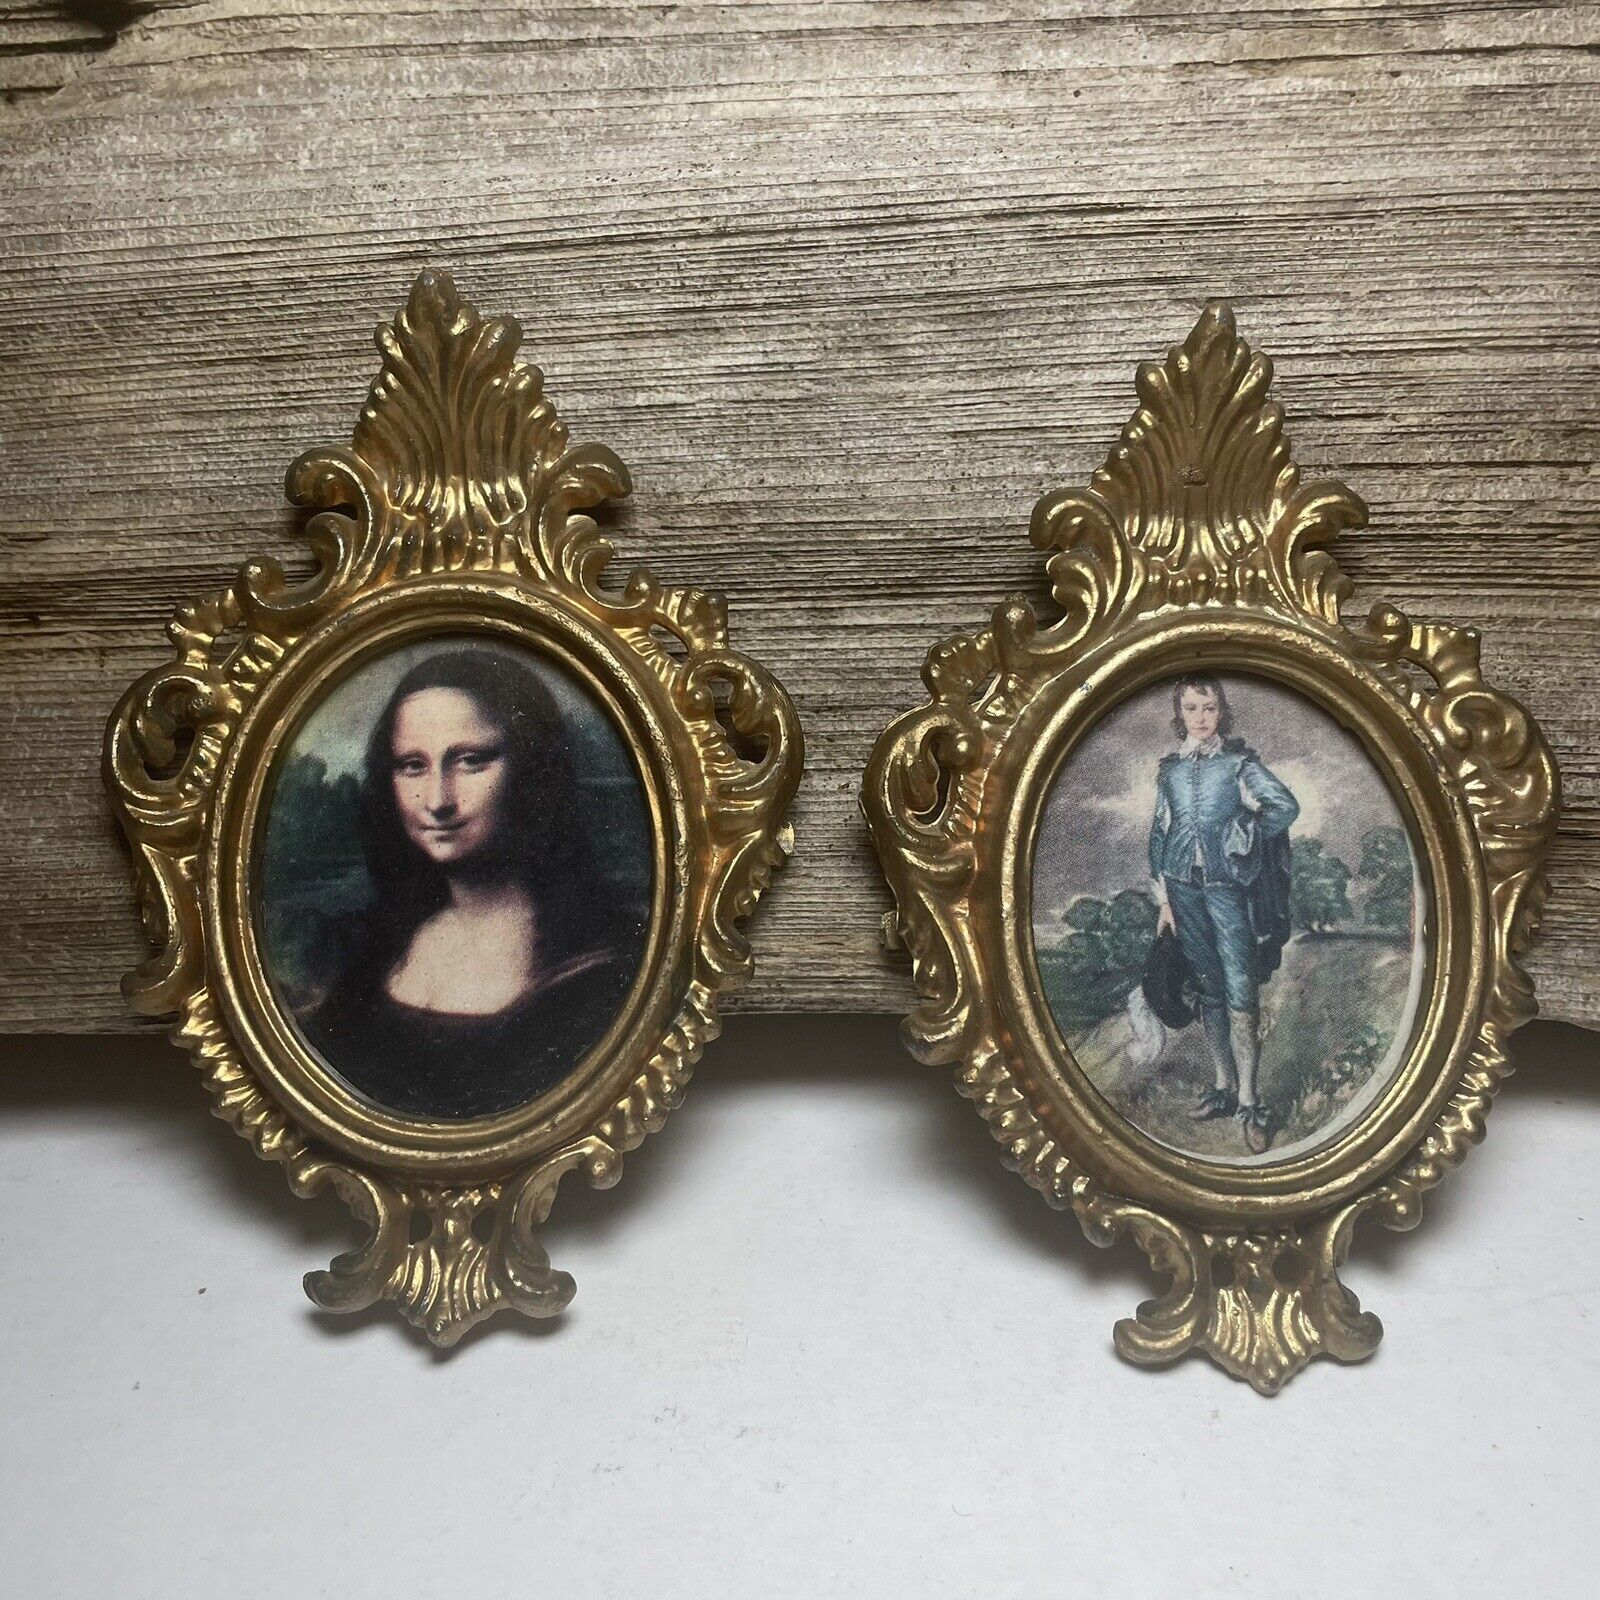 Pair of Small Oval Gold Colored Ornate Frames Pictures Hong Kong Mona Lisa